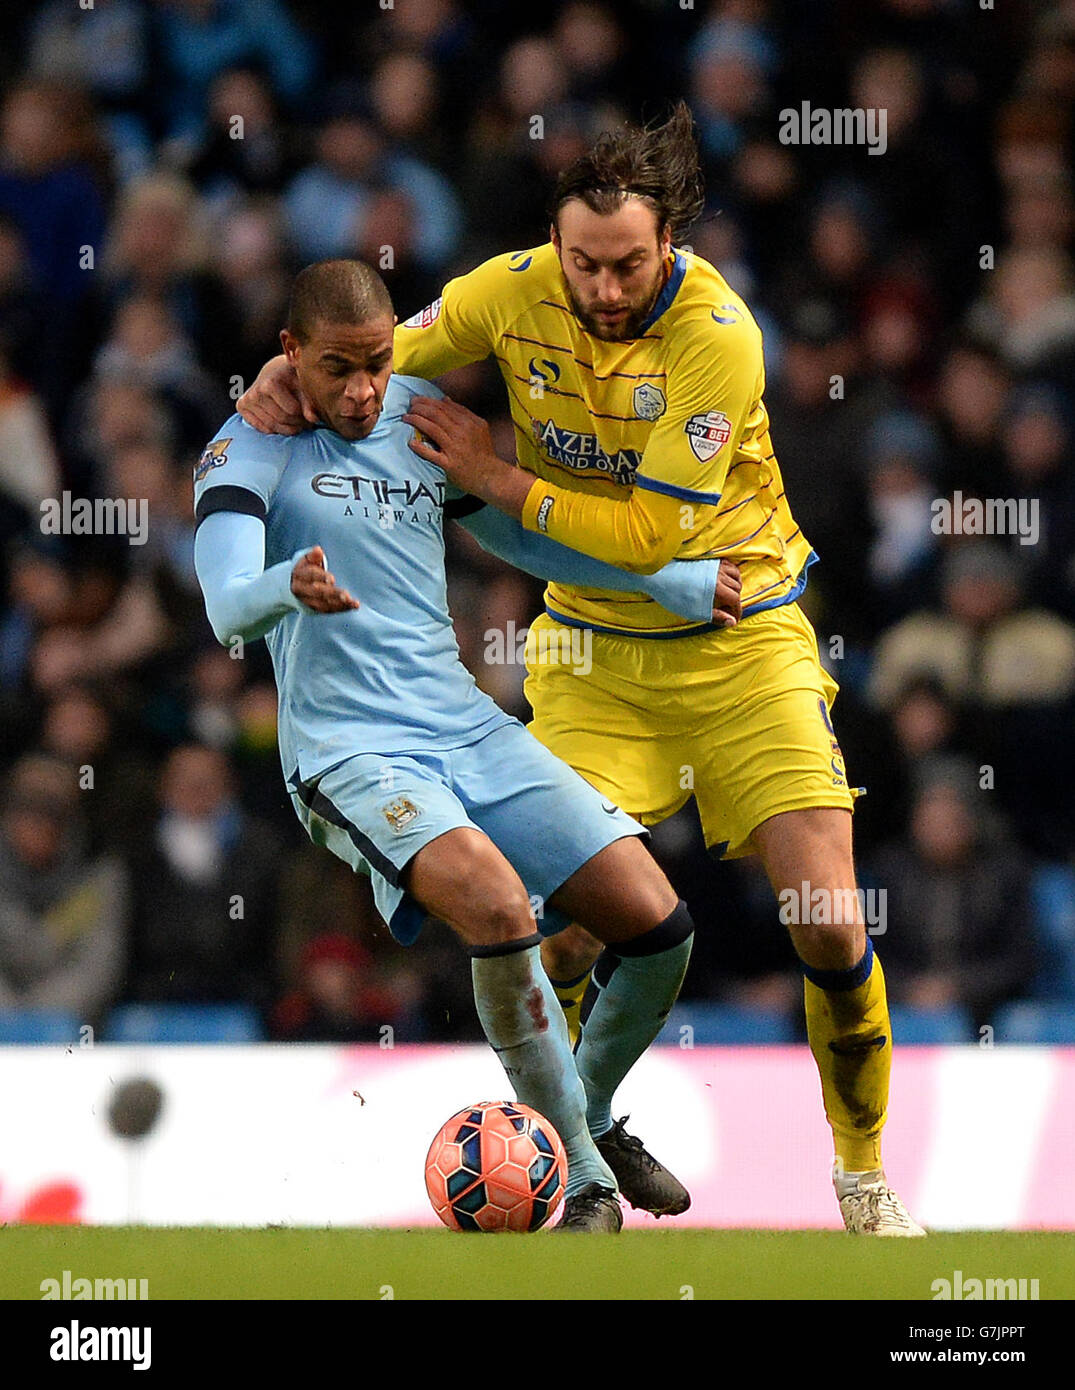 Sheffield Wednesdays Atdhe Nuhiu battles for the ball with Manchester Citys Fernando, during the FA Cup, Third Round match at the Etihad Stadium, Manchester Stock Photo